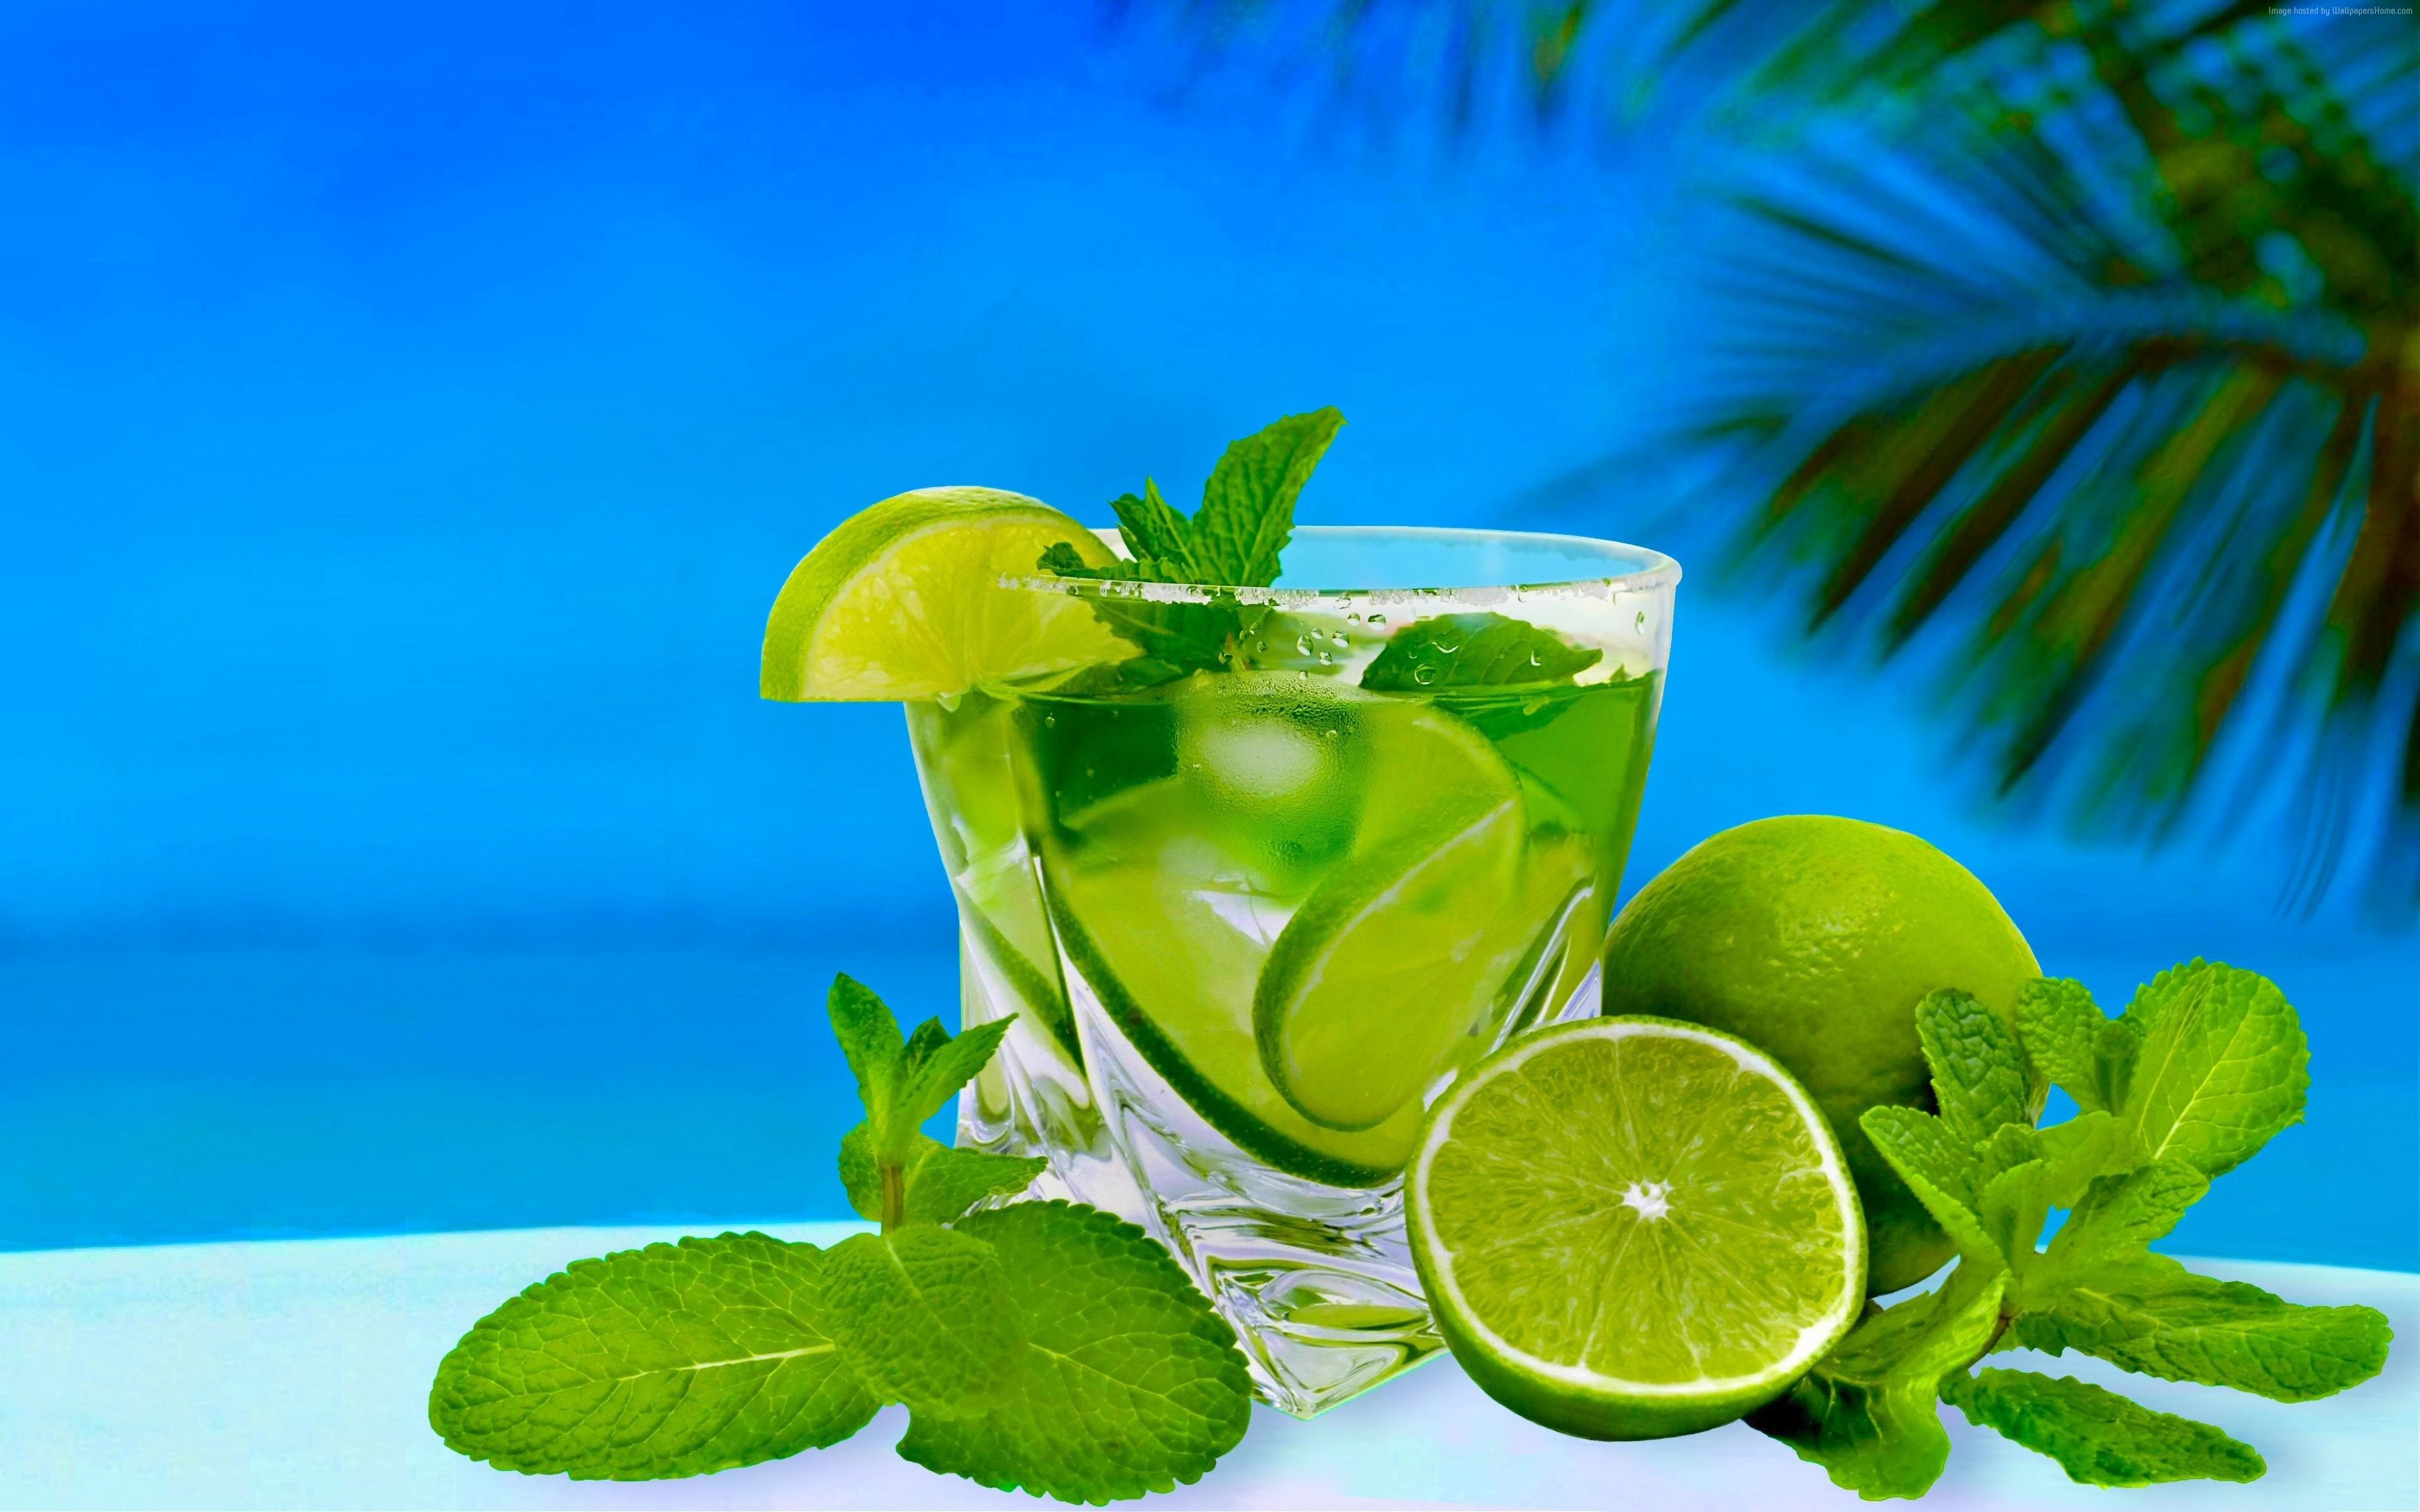 Previous Wallpaper - Limes At The Beach , HD Wallpaper & Backgrounds